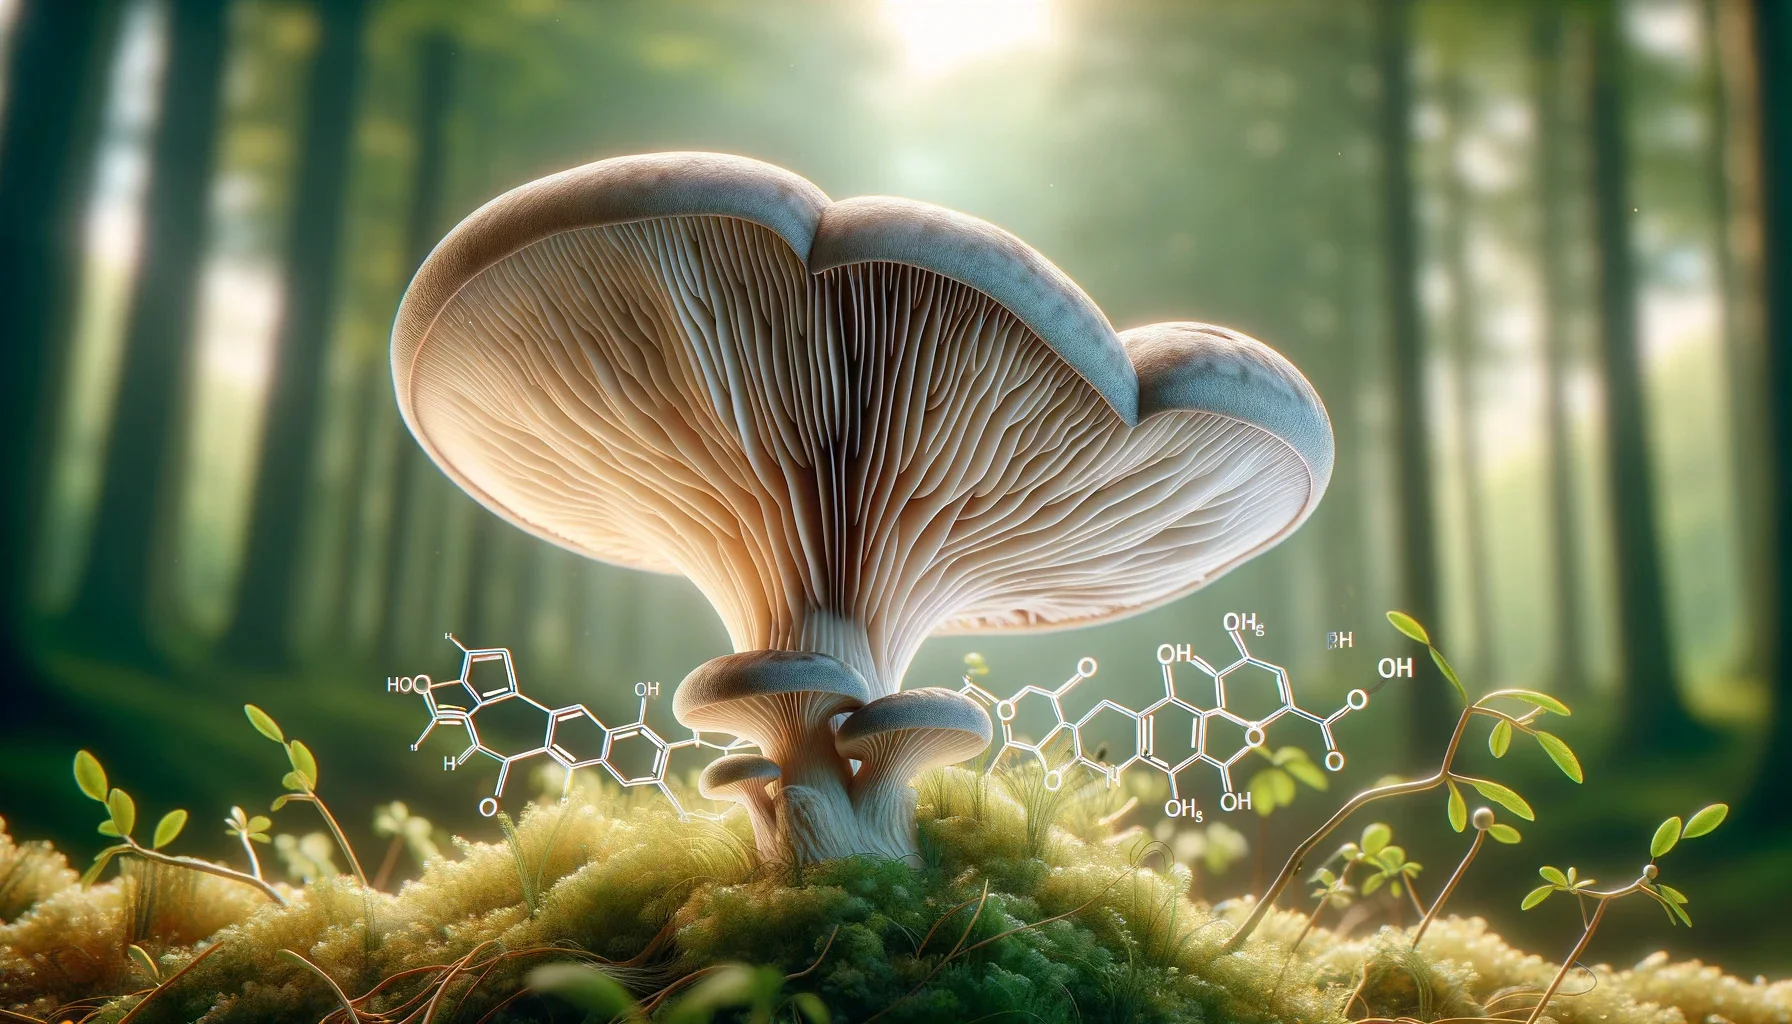 A photorealistic image of an oyster mushroom in a landscape format, artistically incorporating its molecular structure.